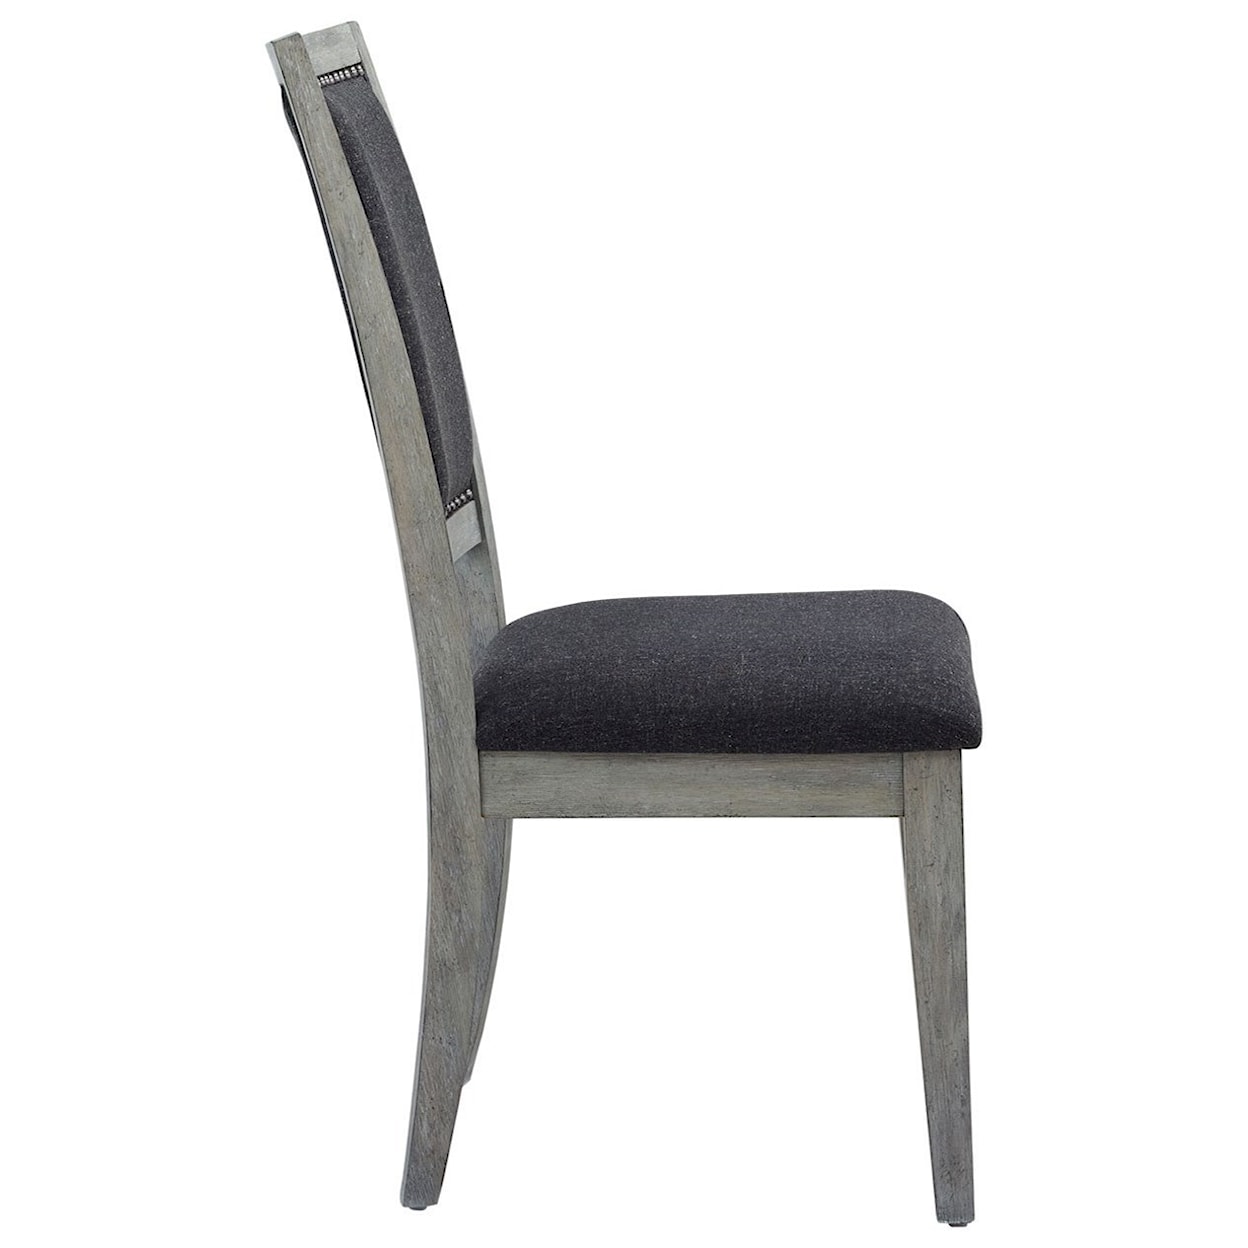 Steve Silver Whitford Side Chair